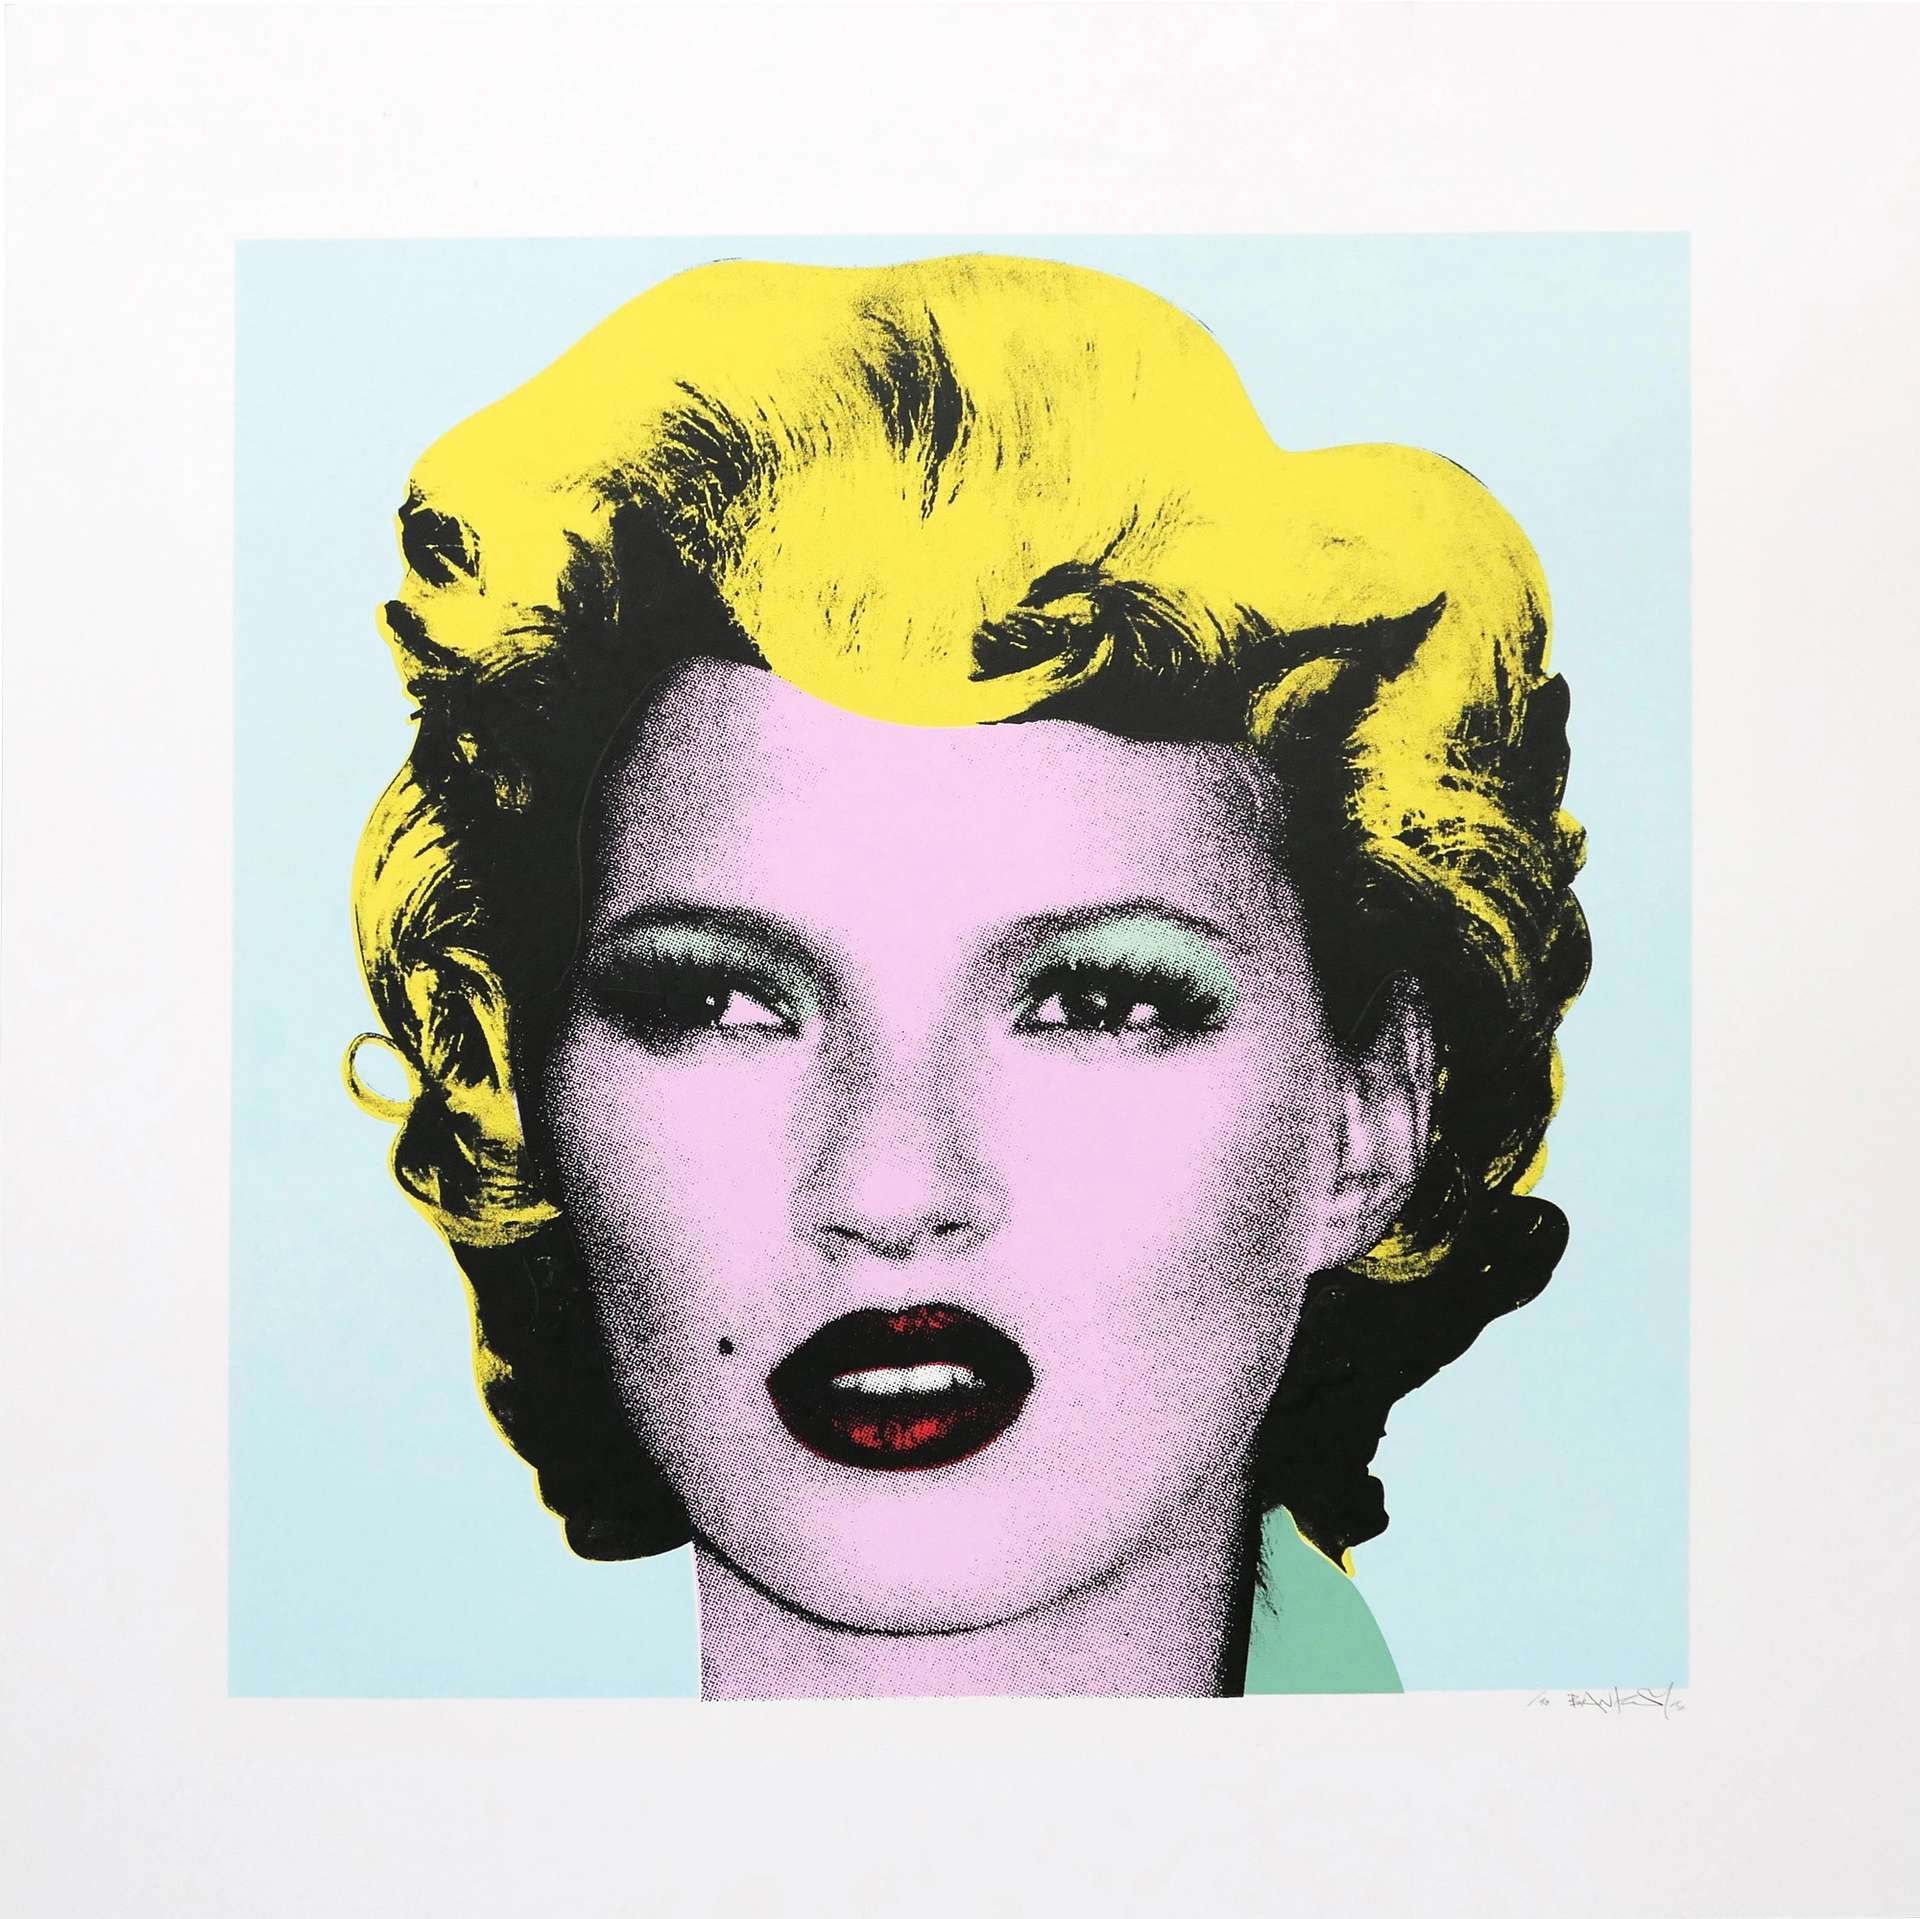 Banksy superimposes the 90s supermodel’s recognisable face onto Monroe's hair, colour blocking in homage to Warhol’s bold Pop Art style.